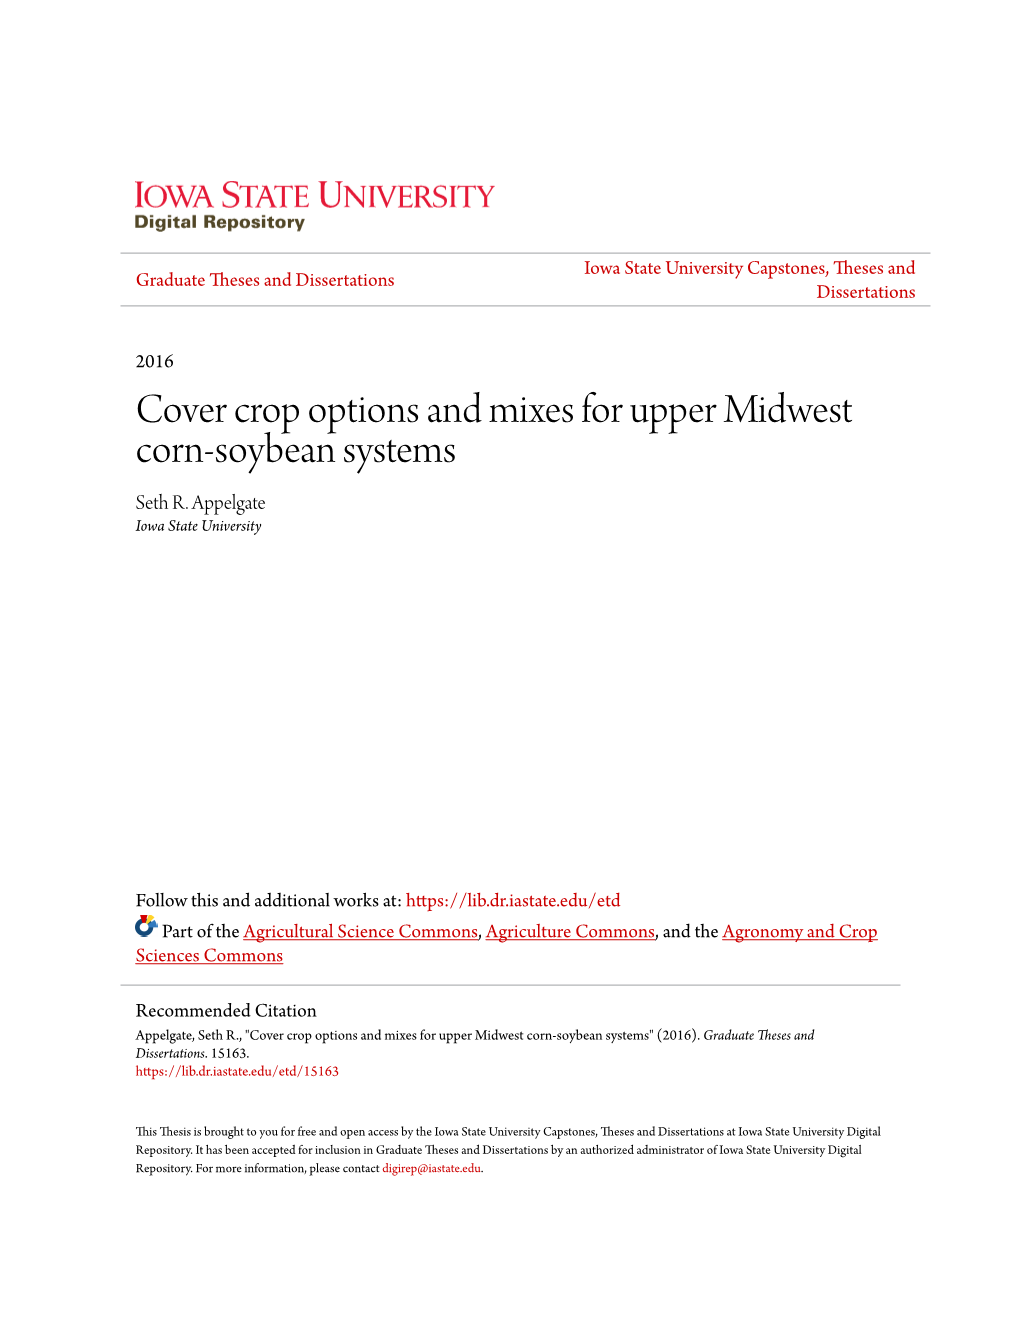 Cover Crop Options and Mixes for Upper Midwest Corn-Soybean Systems Seth R